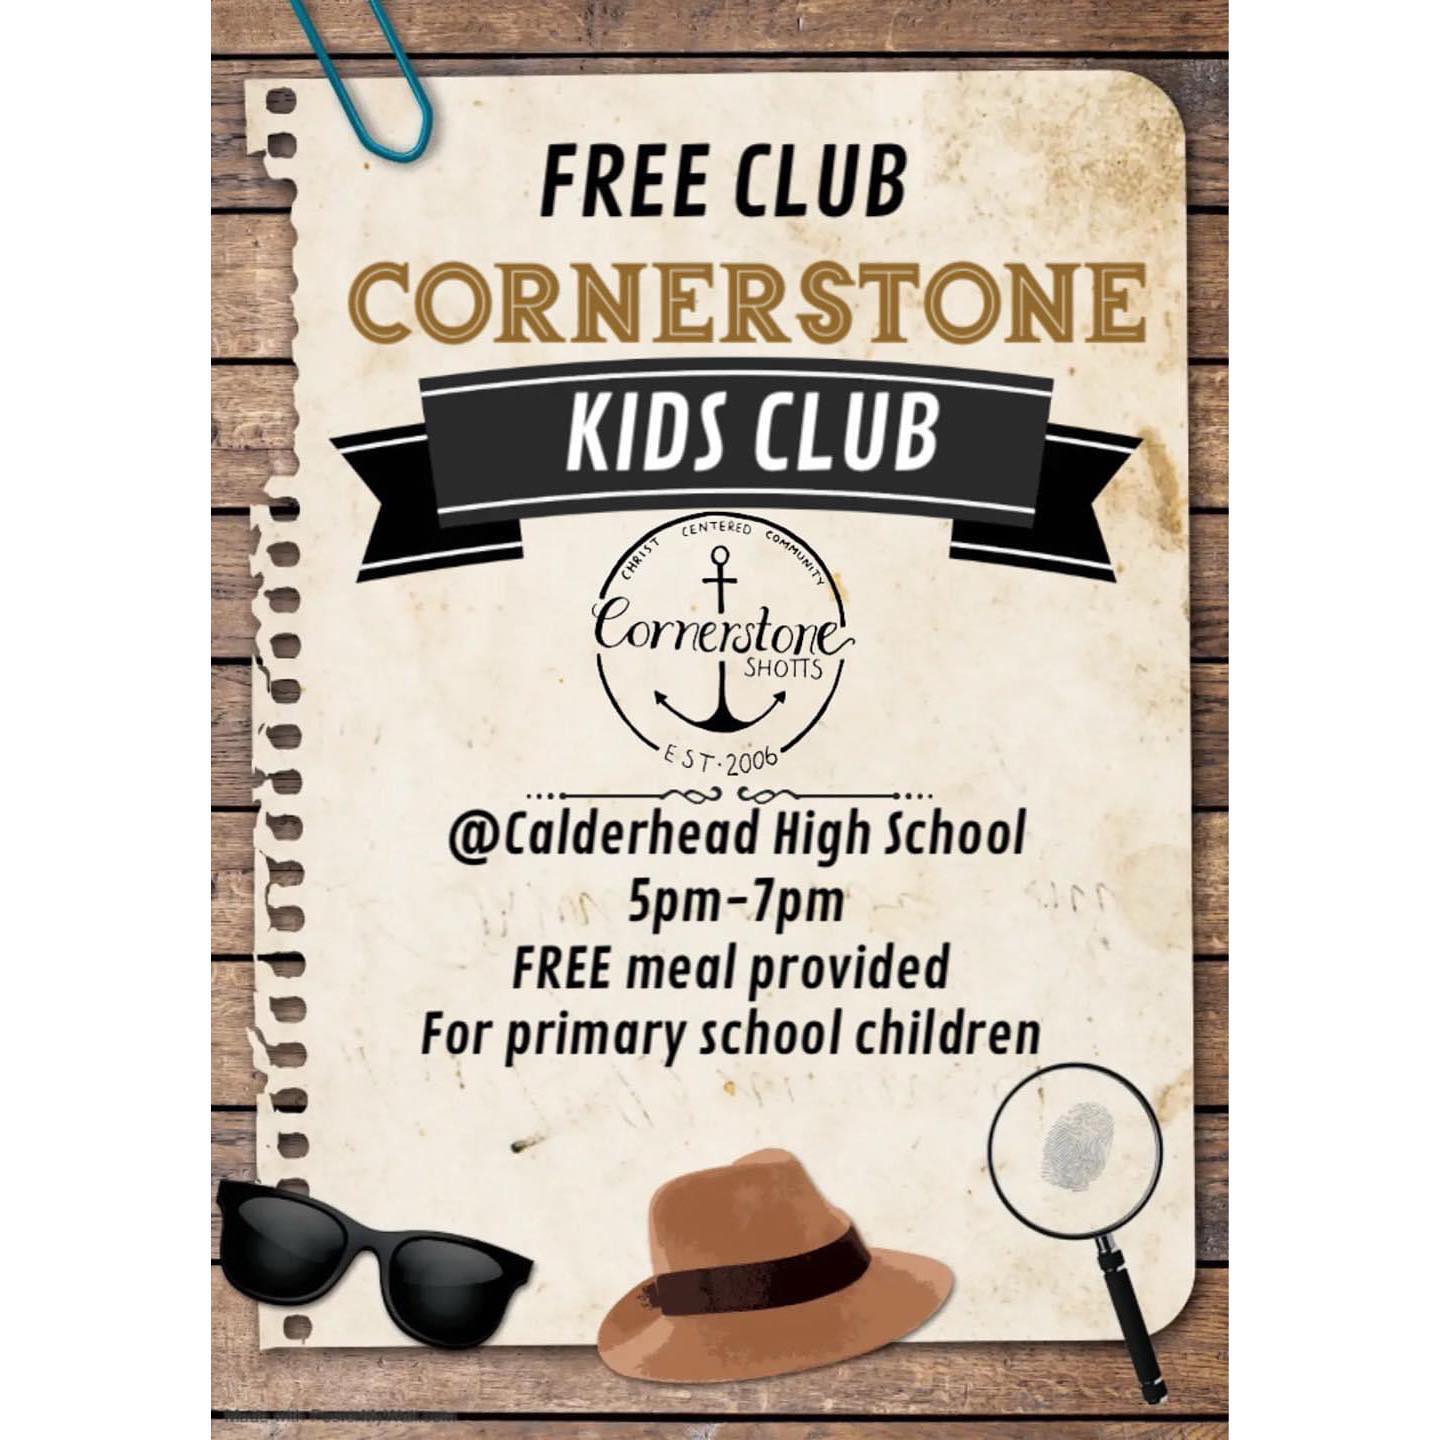 Our free club is on at Calderhead high from 5pm-7pm.Tonight is beans and toast for dinner. We can’t wait to see your little ones tonight.

REMINDER: please return consent forms or ask Robert for another one.